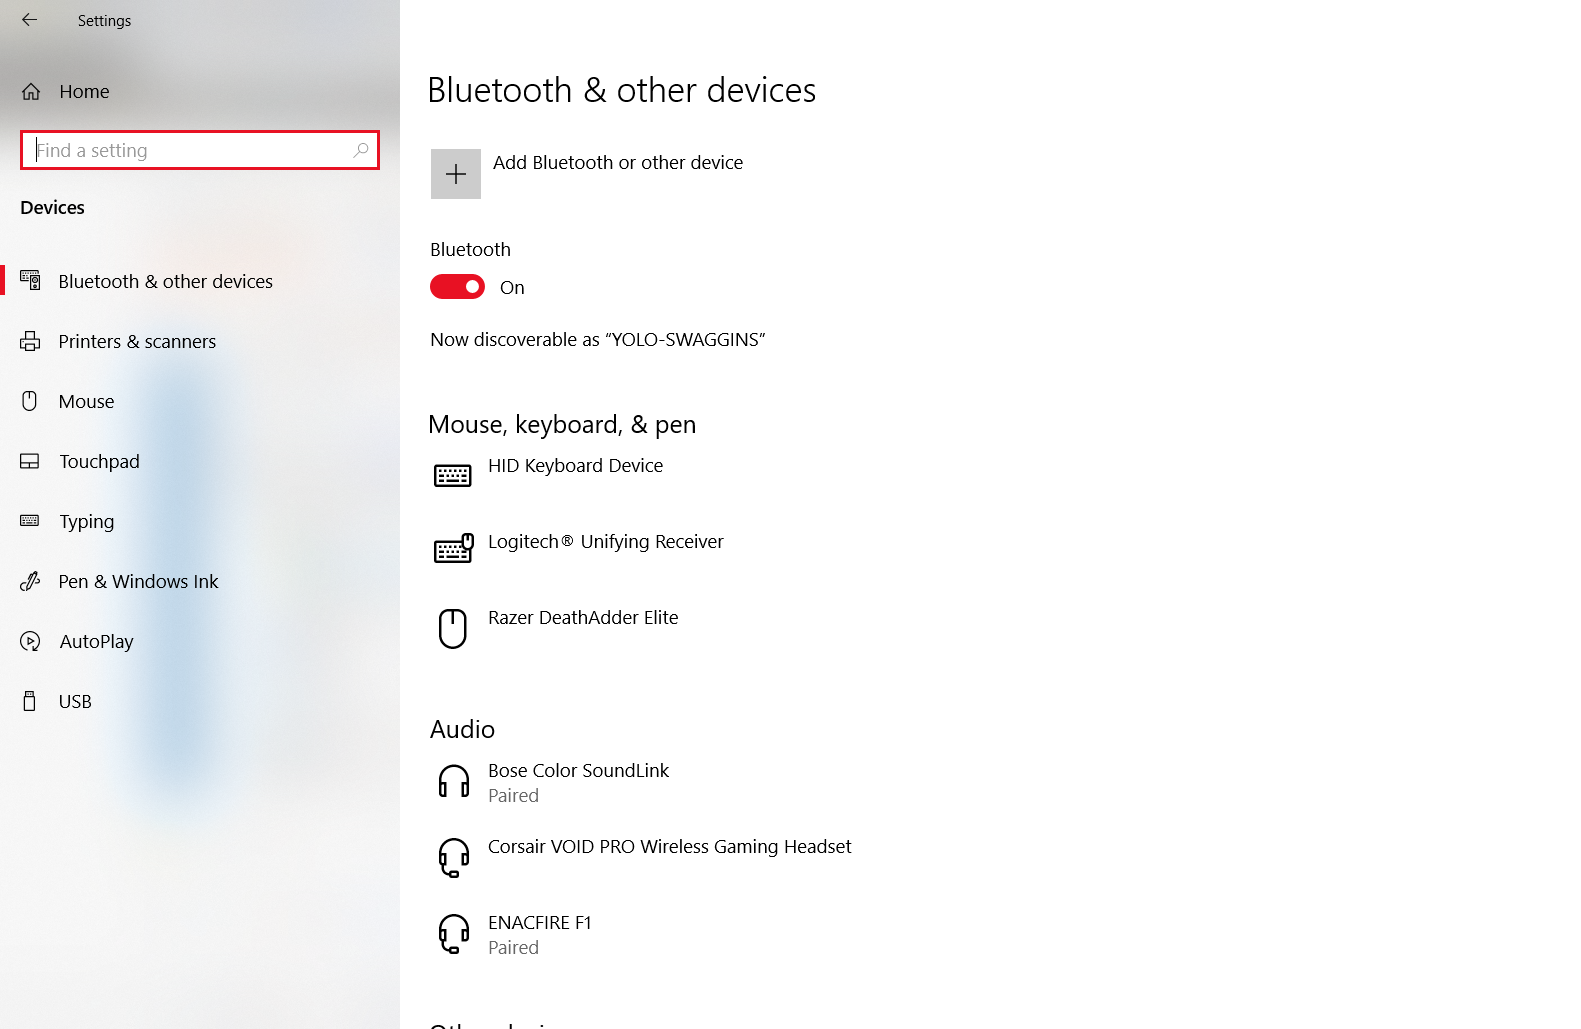 Bluetooth Malfunctions After Reboot 7ce21dc6-6779-4444-97e0-66b489db126d?upload=true.png